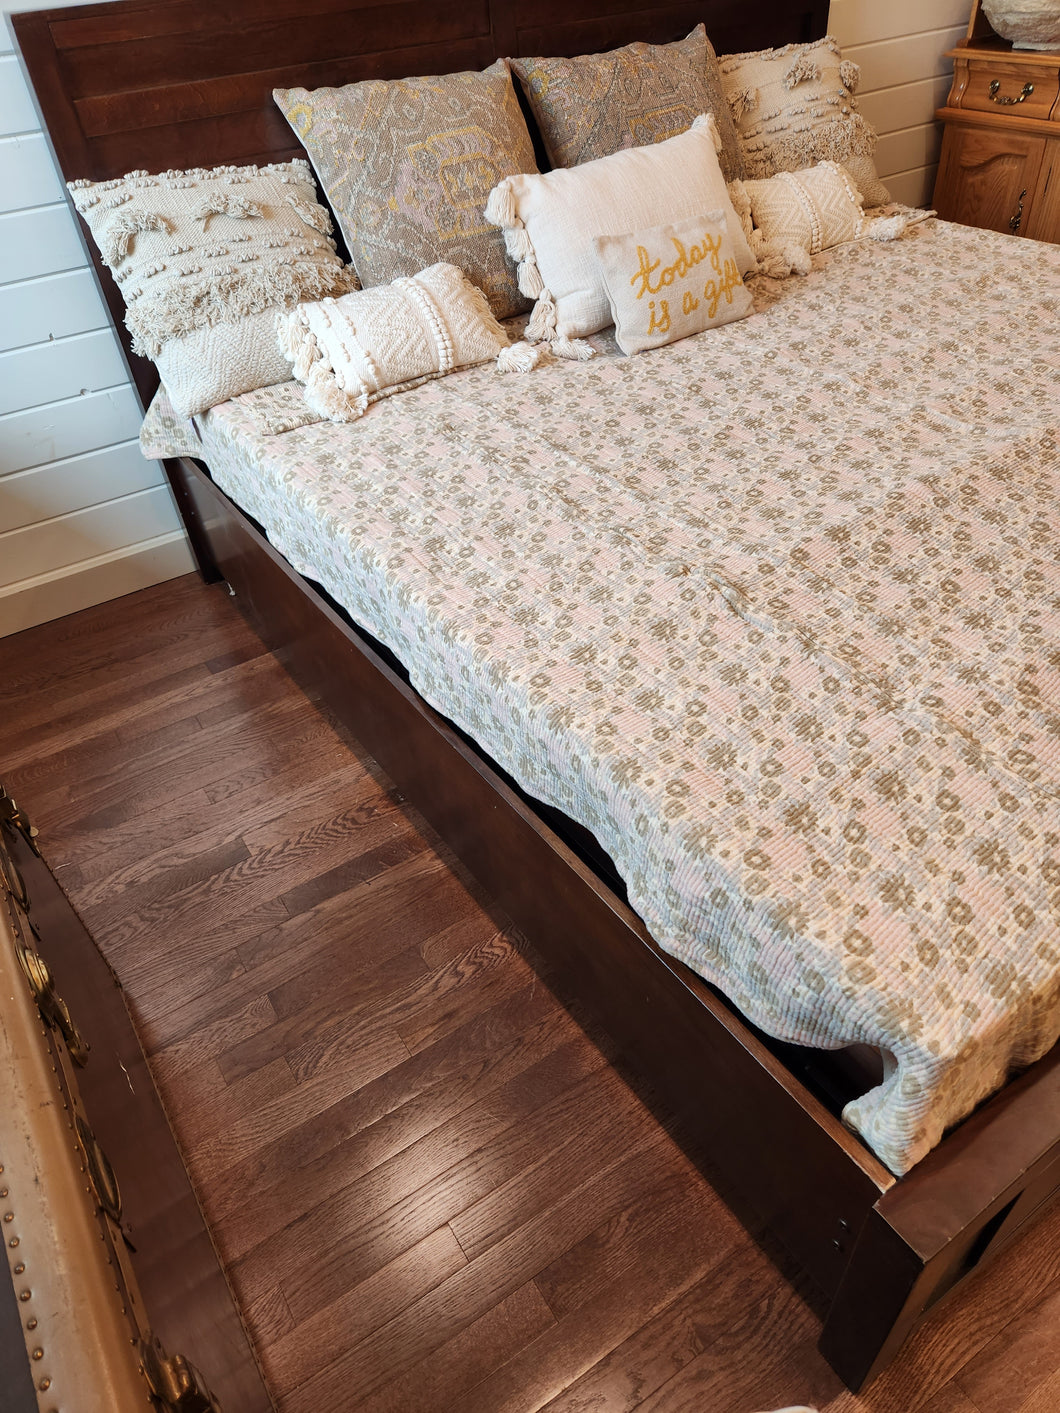 Carmel Cappuccino Wood King Storage Bed